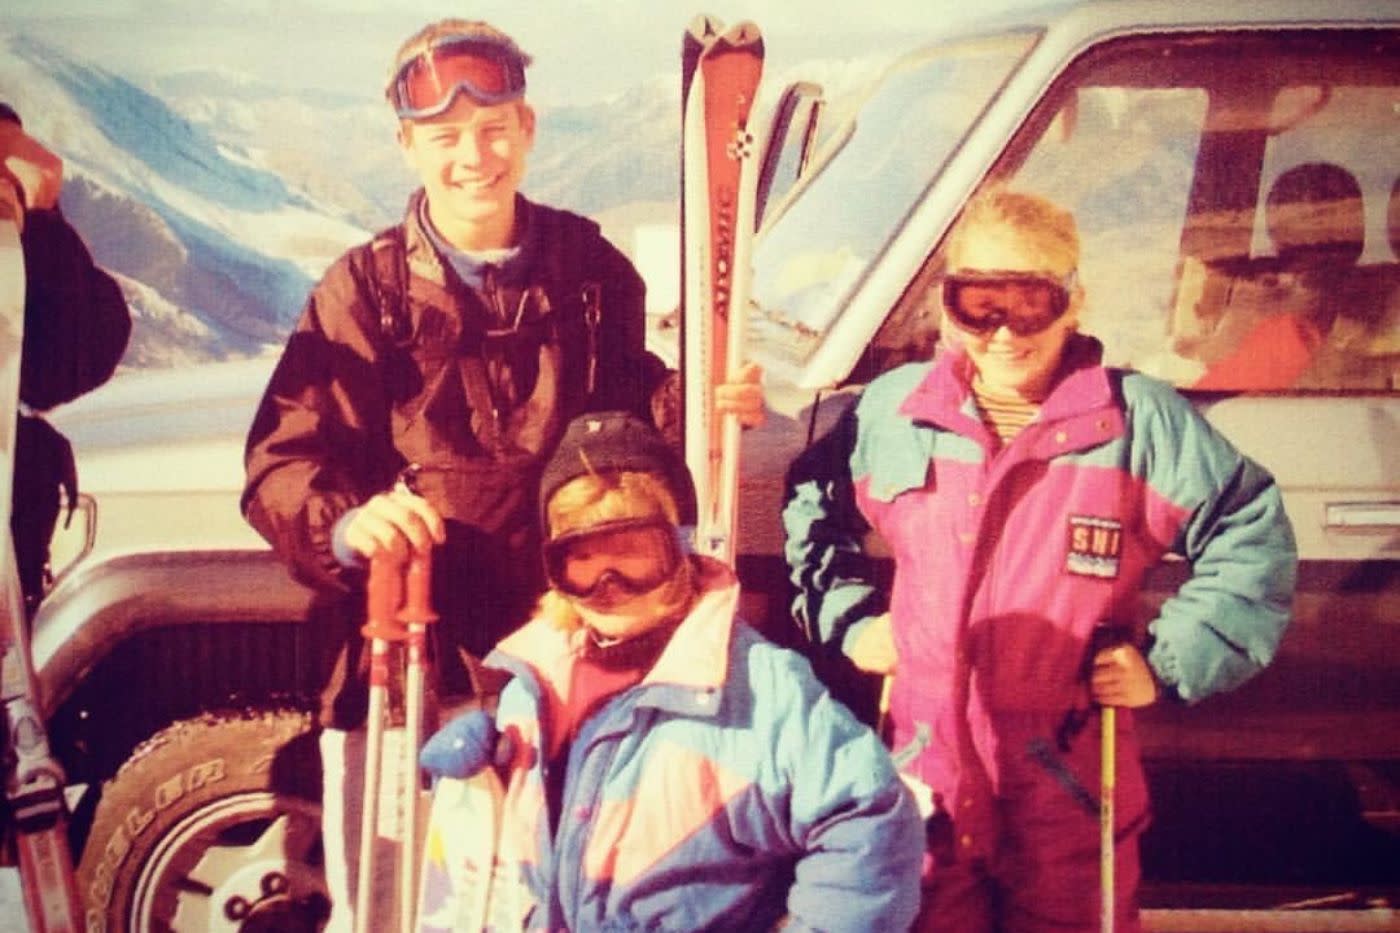 Hamish Fleming posing with skis as a child